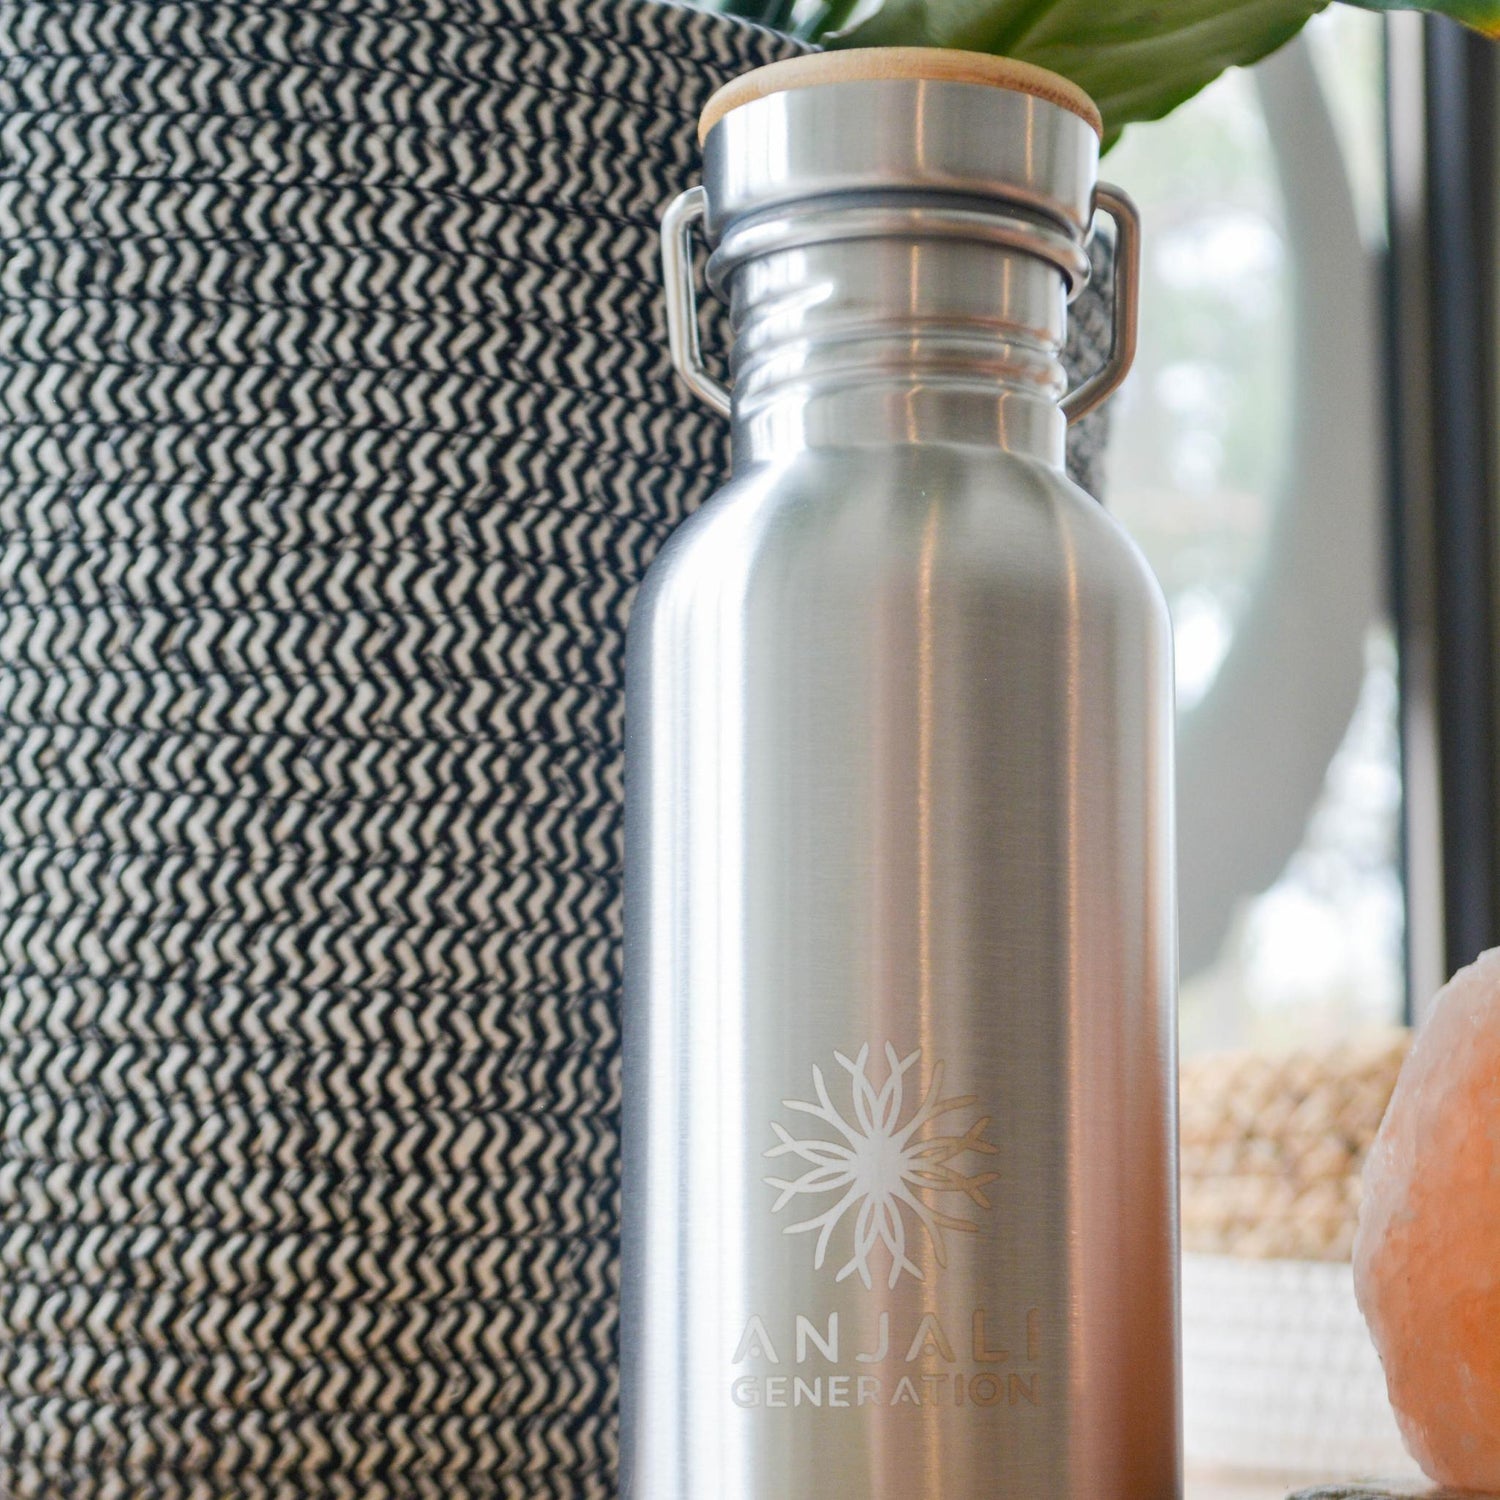 The Anjali Water Bottle-Yoga Accessories-Anjali Generation